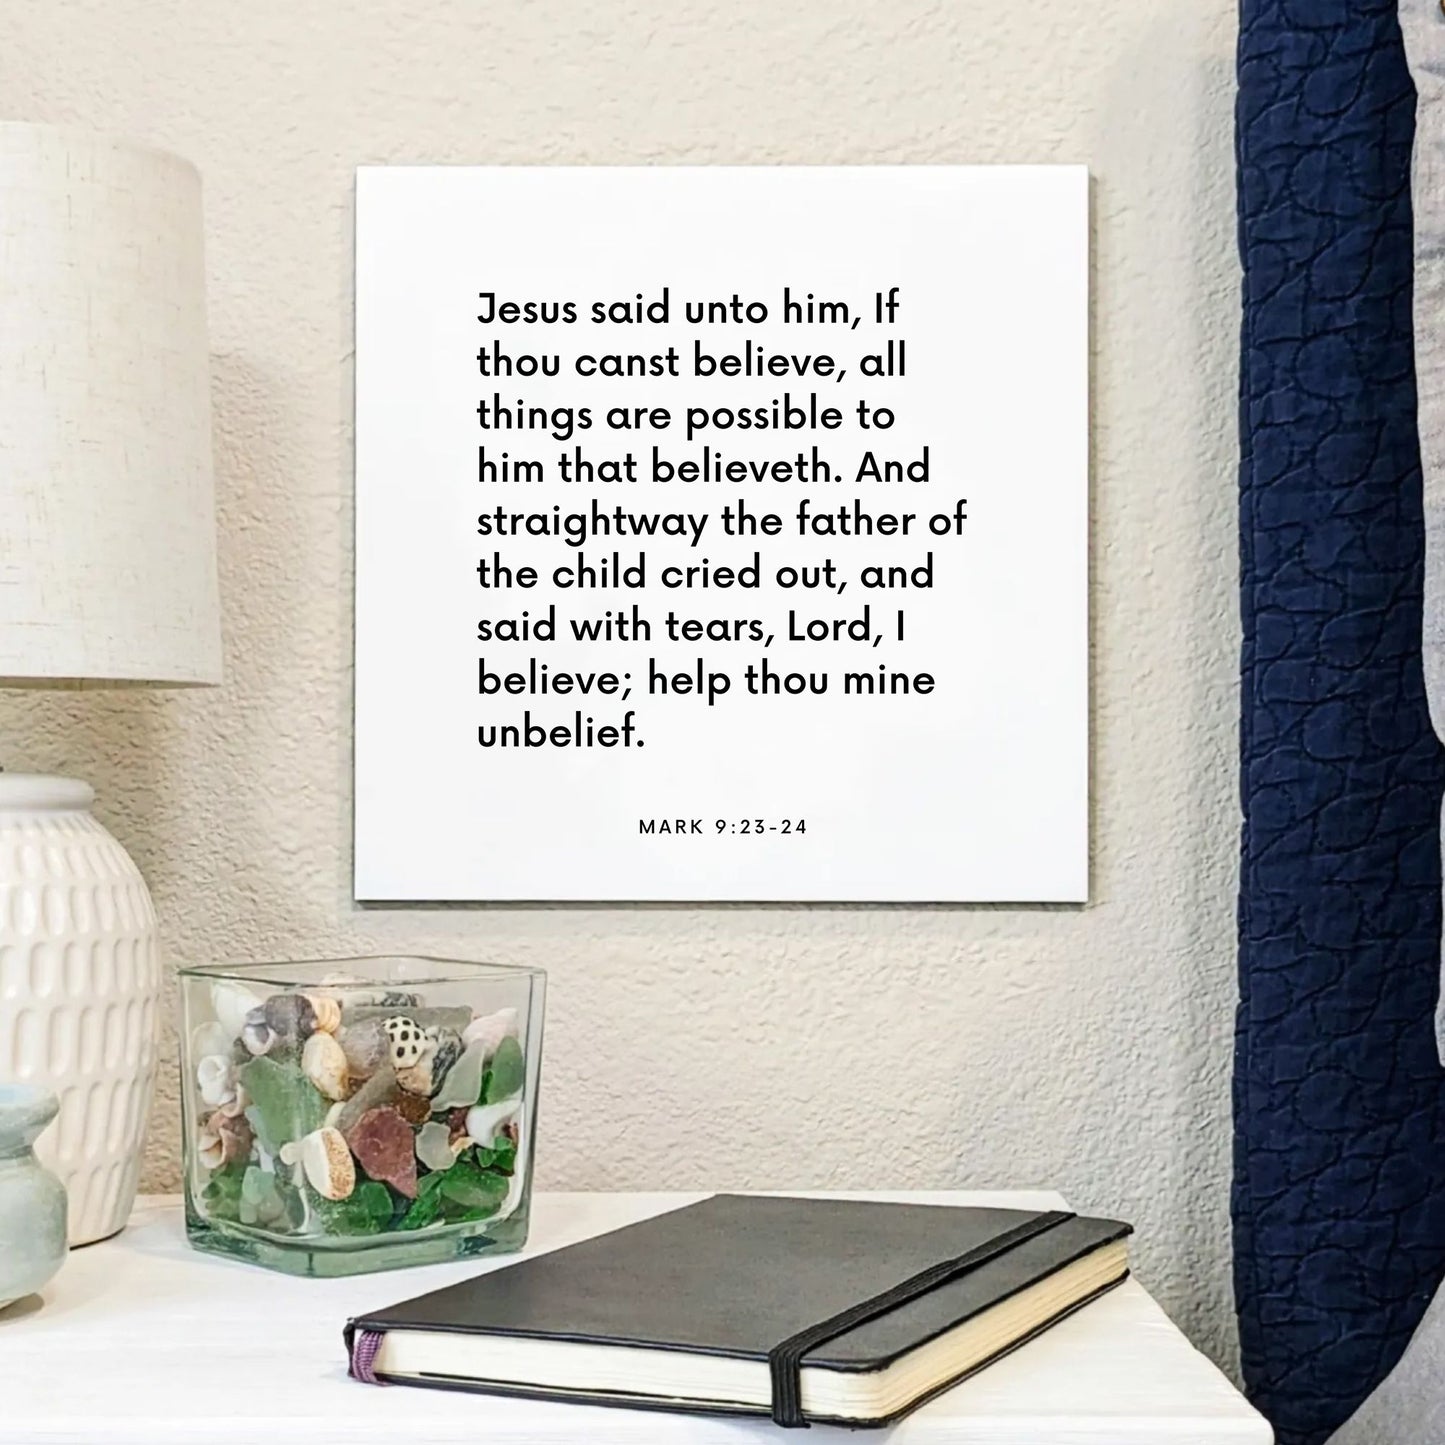 Bedside mouting of the scripture tile for Mark 9:23-24 - "Lord, I believe; help thou mine unbelief"